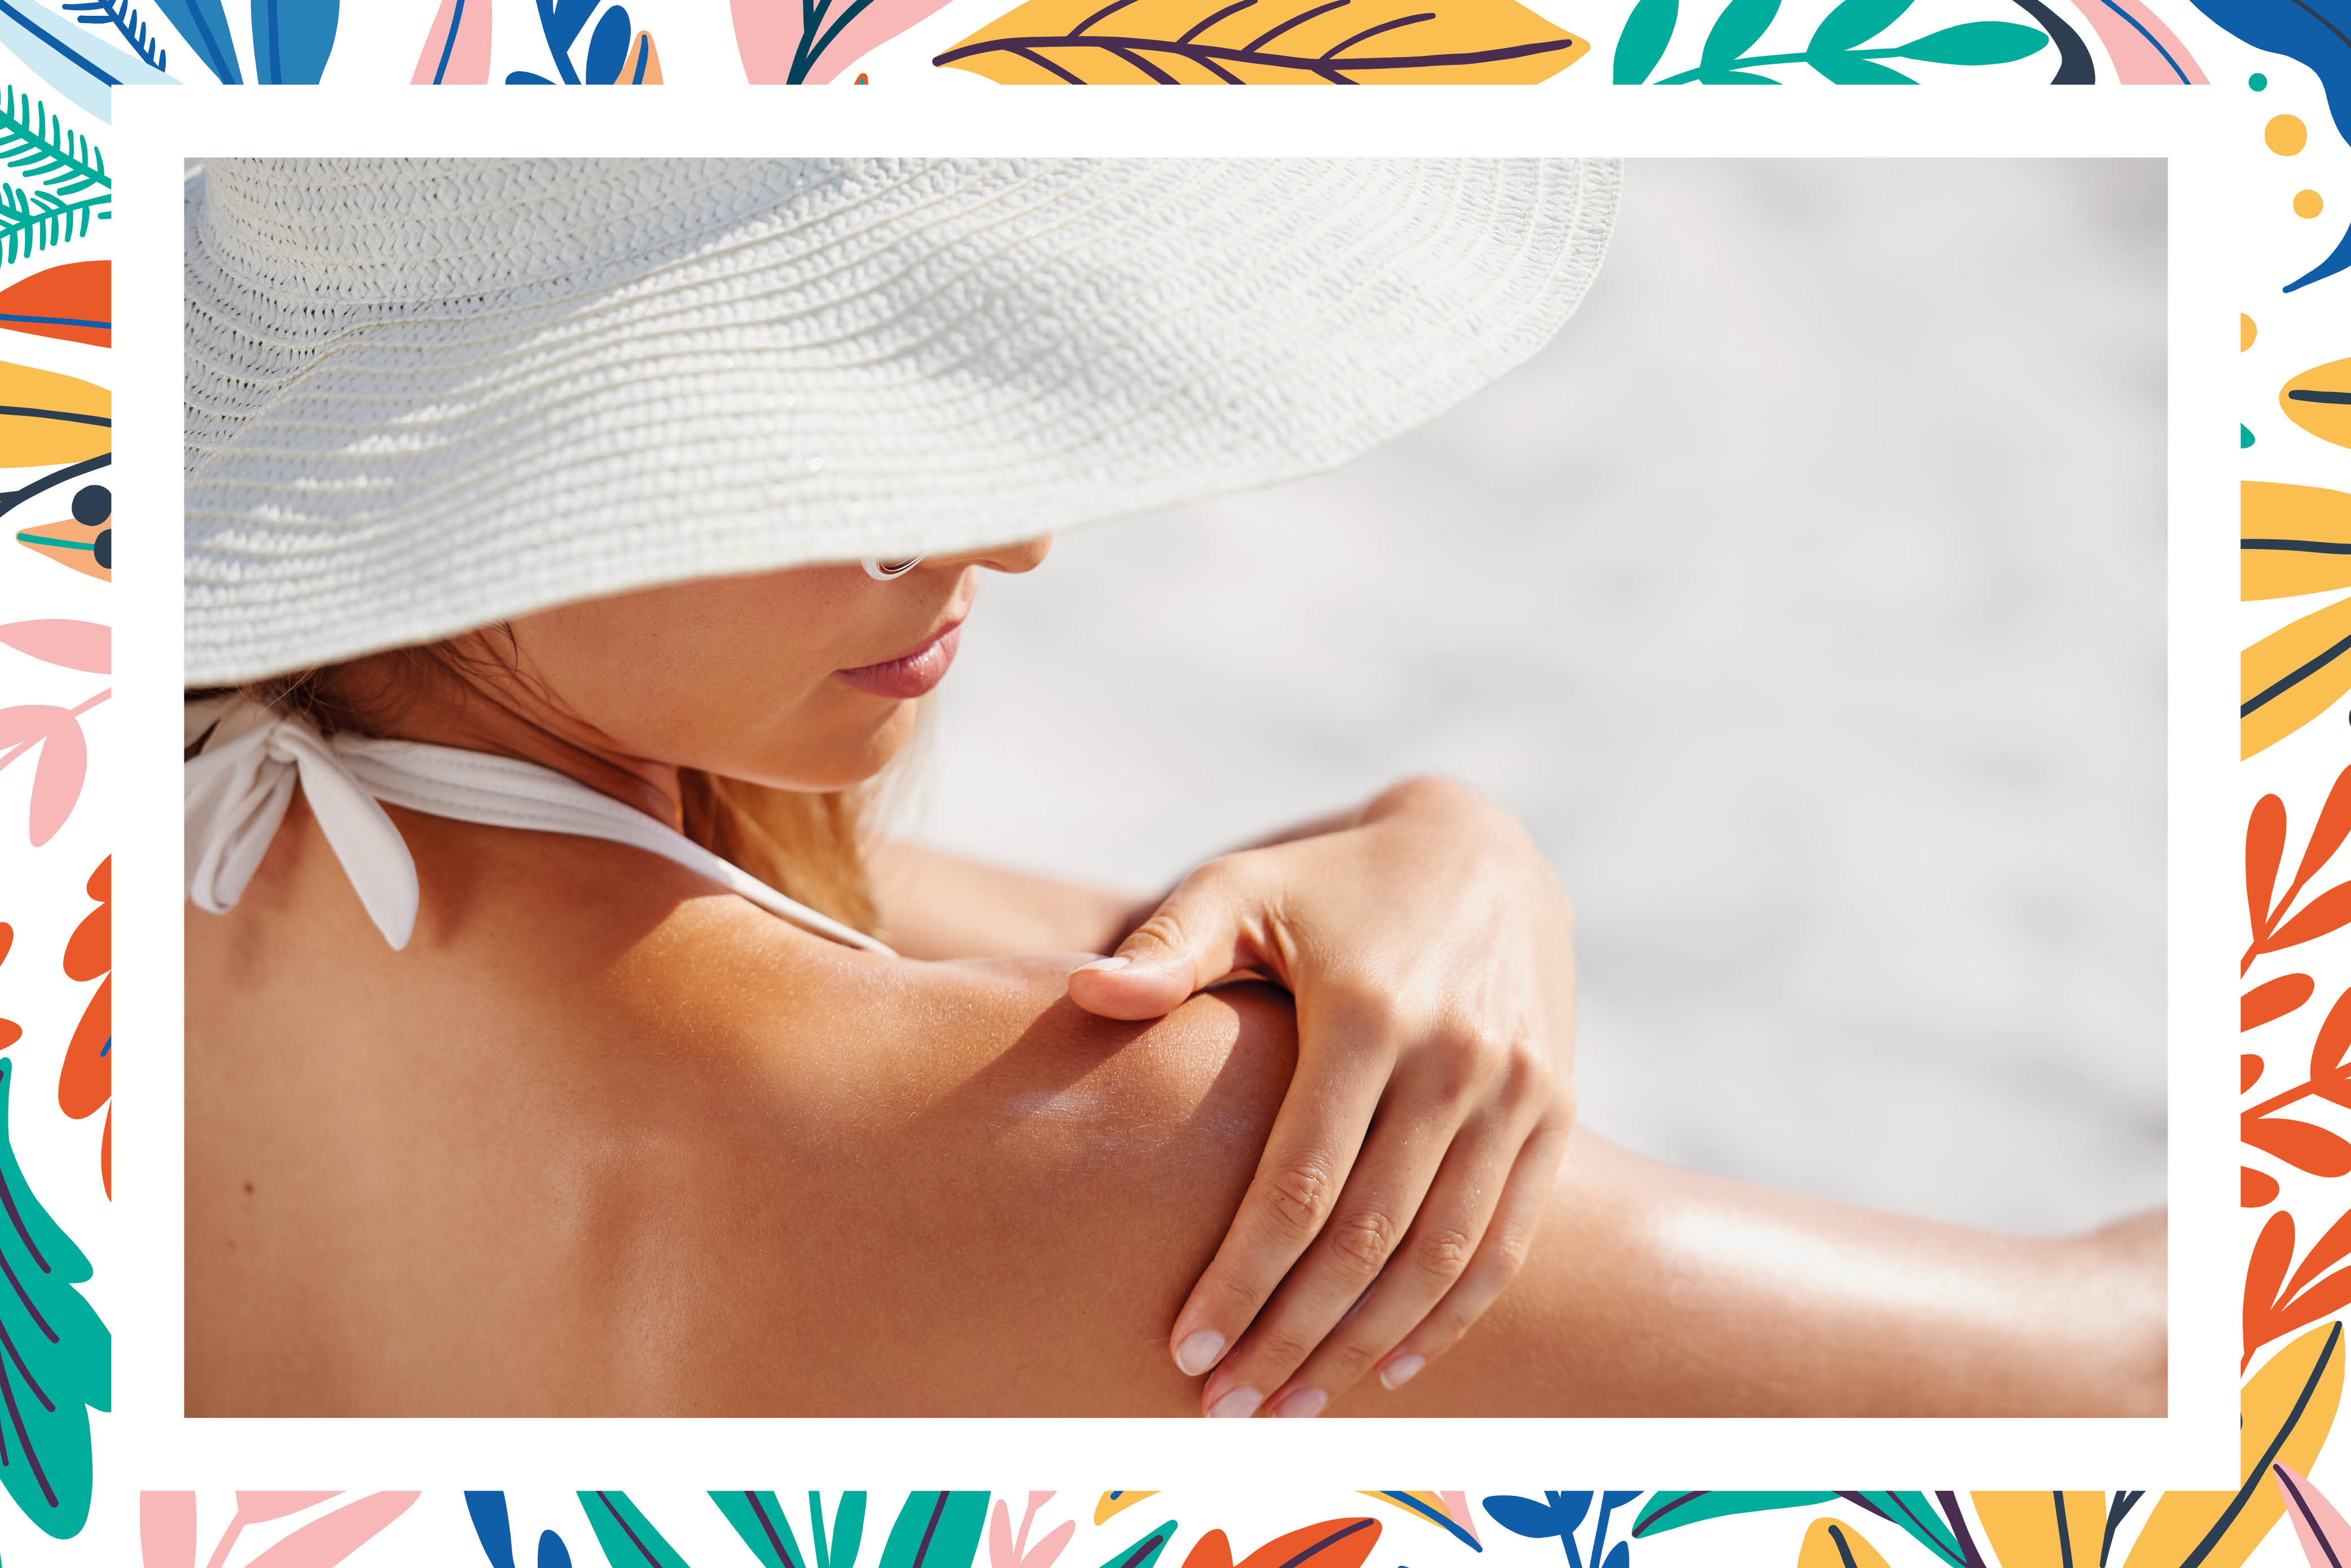 Must-try mineral sunscreens to brighten up your summer